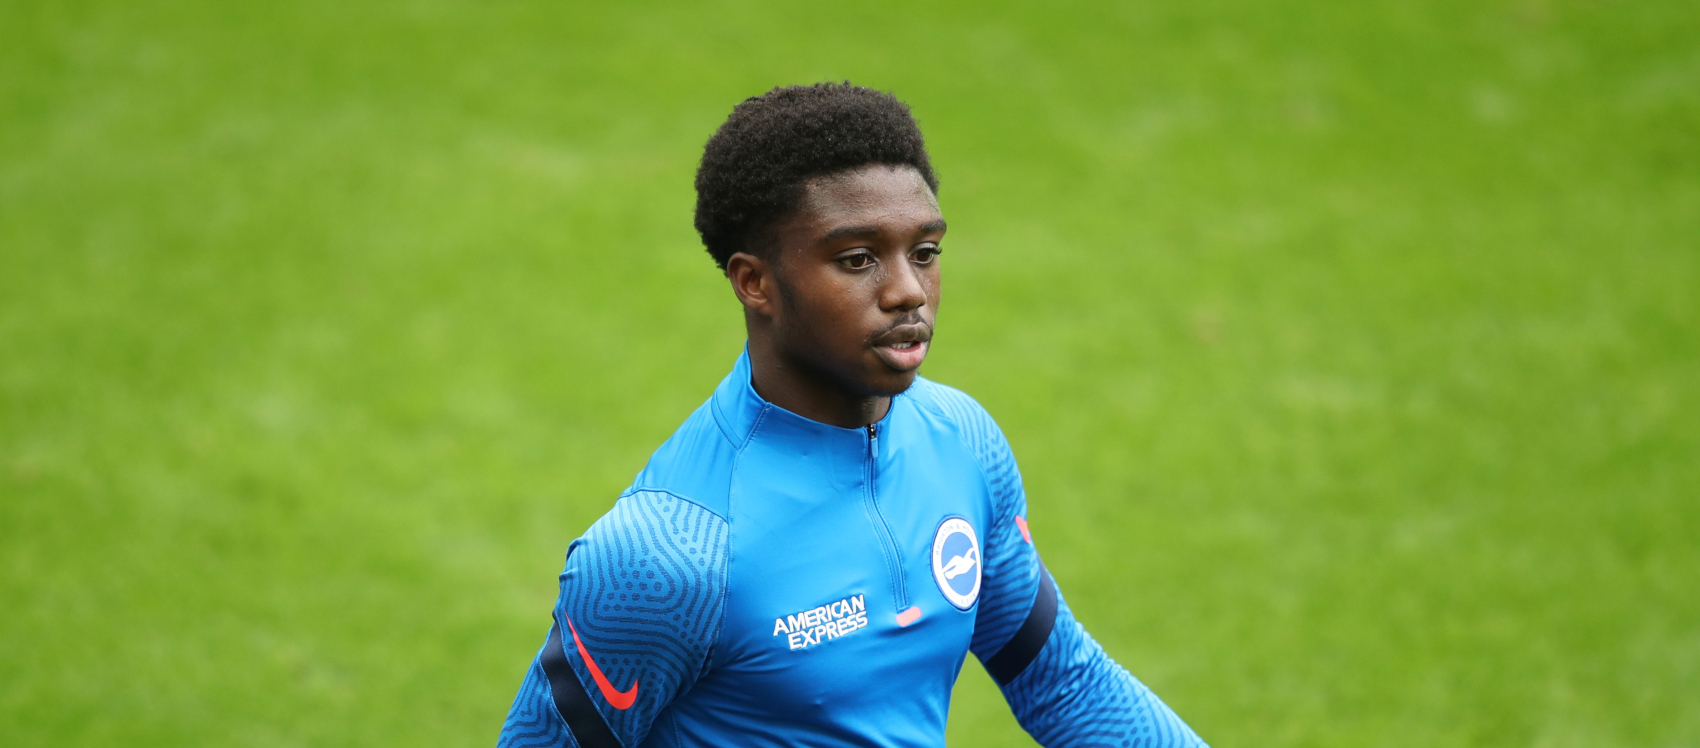 Leeds transfer news: Club closing in on deal for 'fearless' forward with 'manners'